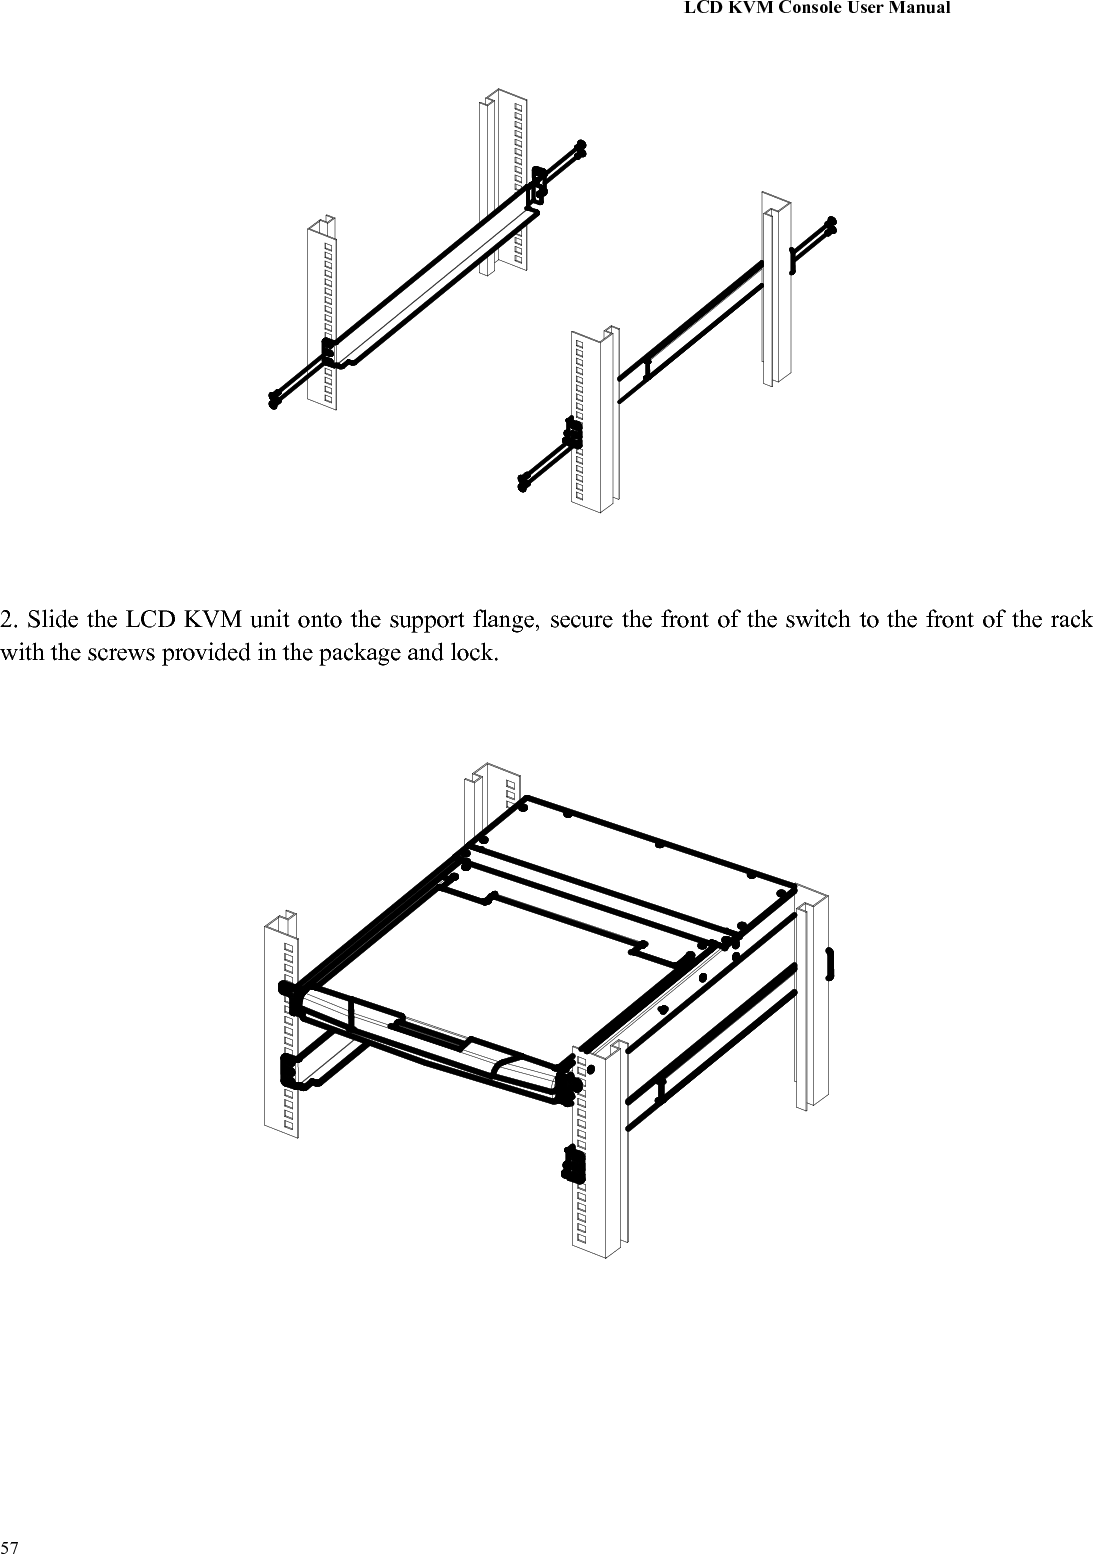 LCD KVM Console User Manual572. Slide the LCD KVM unit onto the support flange, secure the front of the switch to the front of the rackwith the screws provided in the package and lock.